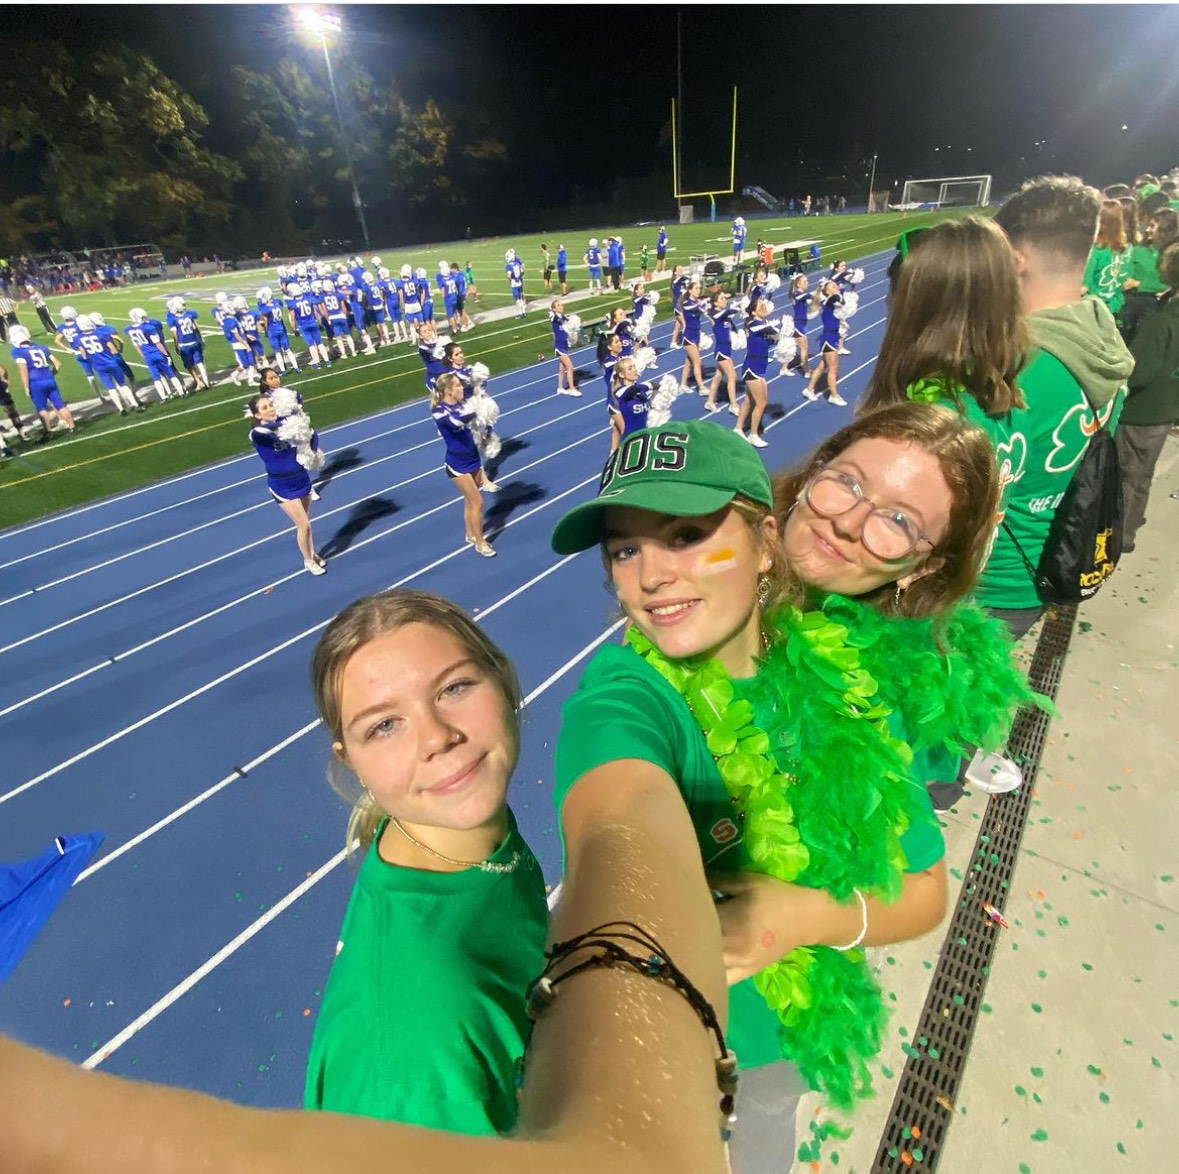 On October 27th, Scituate football fans were decked out in green to celebrate the Irish Exchange program. The luck of the Irish worked--with a final score of 49-24 in Scituates favor.